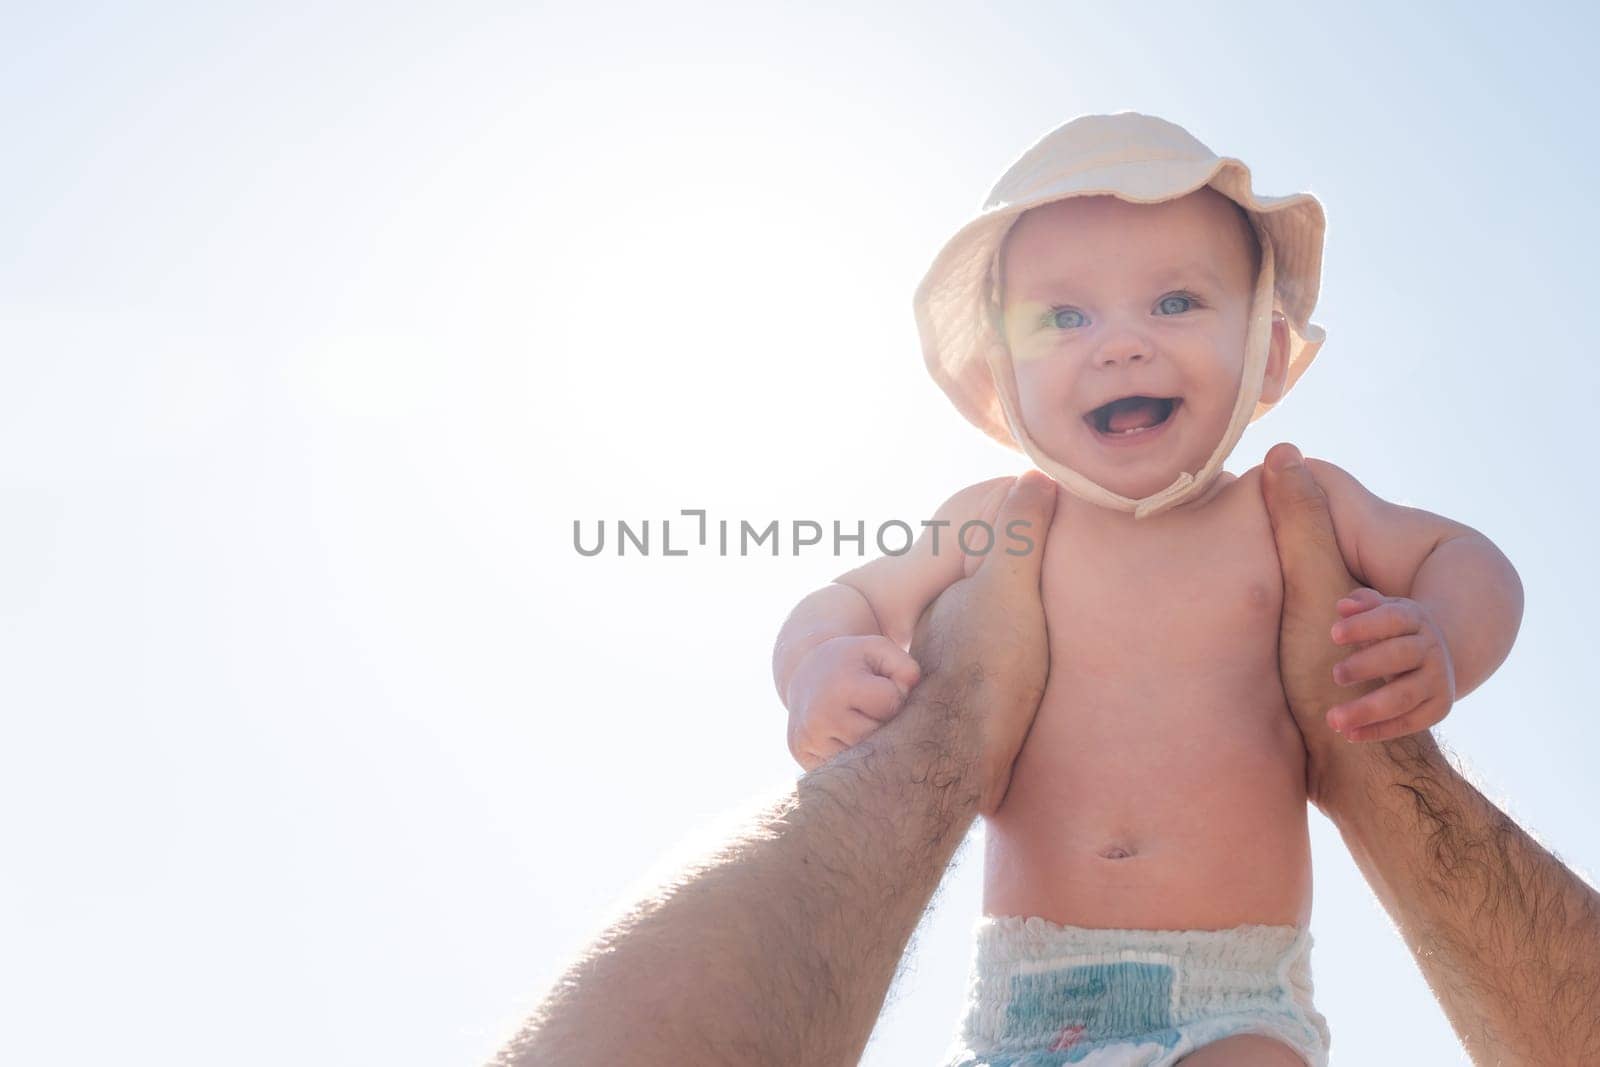 Baby held high against a sunny backdrop by a loving father. Concept of joy and freedom in early childhood by Mariakray